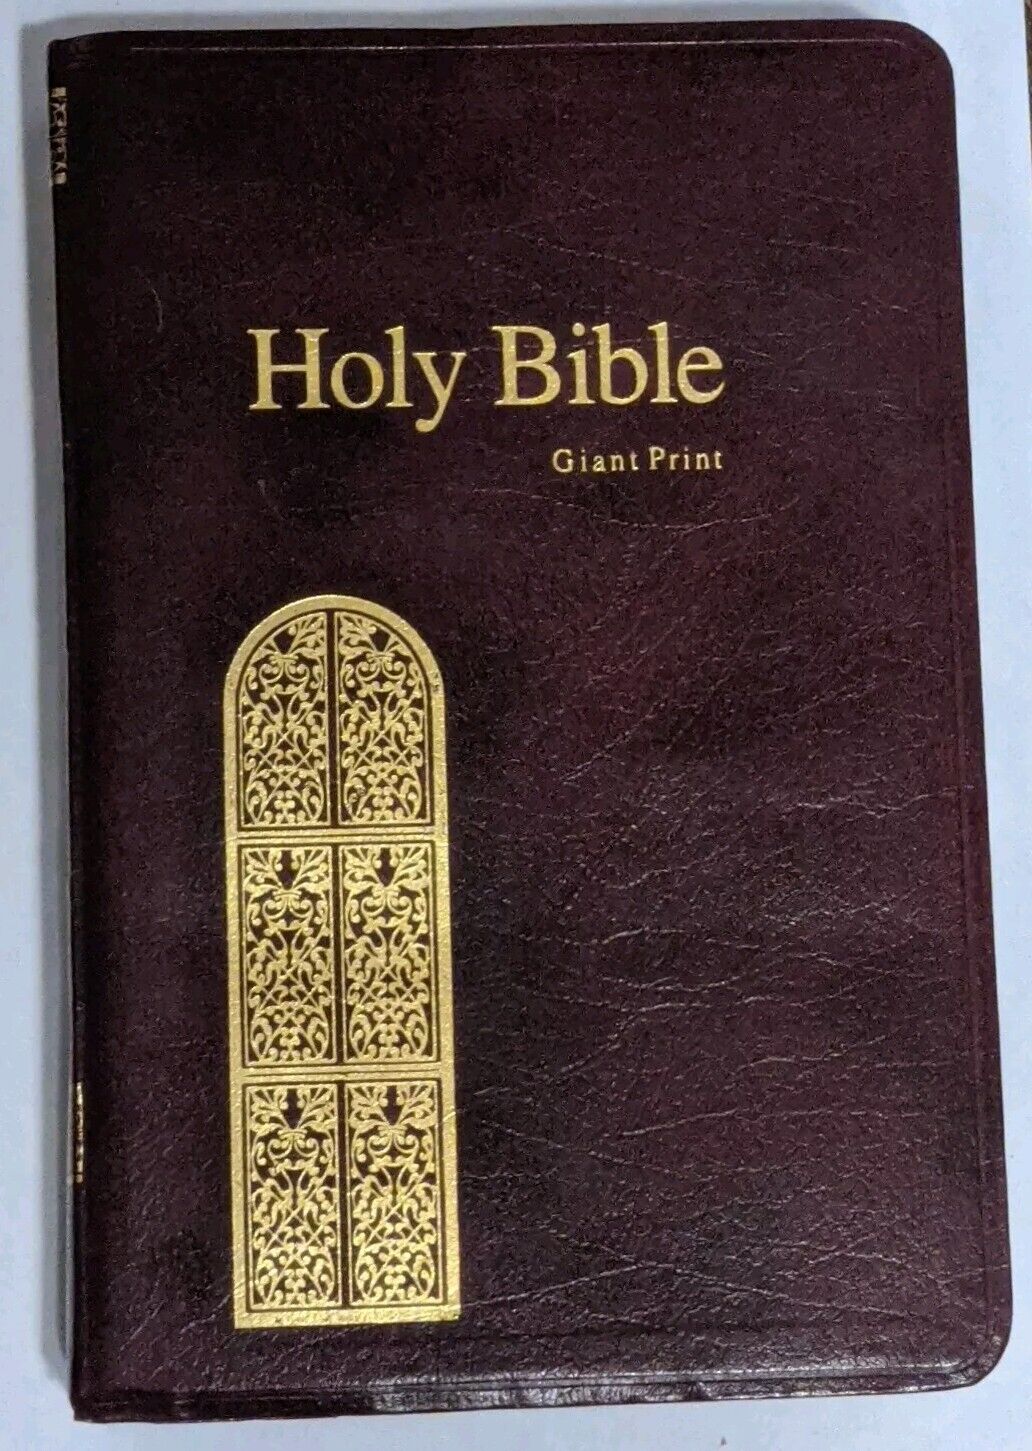 Holy Bible - Vintage Giant Print - Leather Cover -King James version